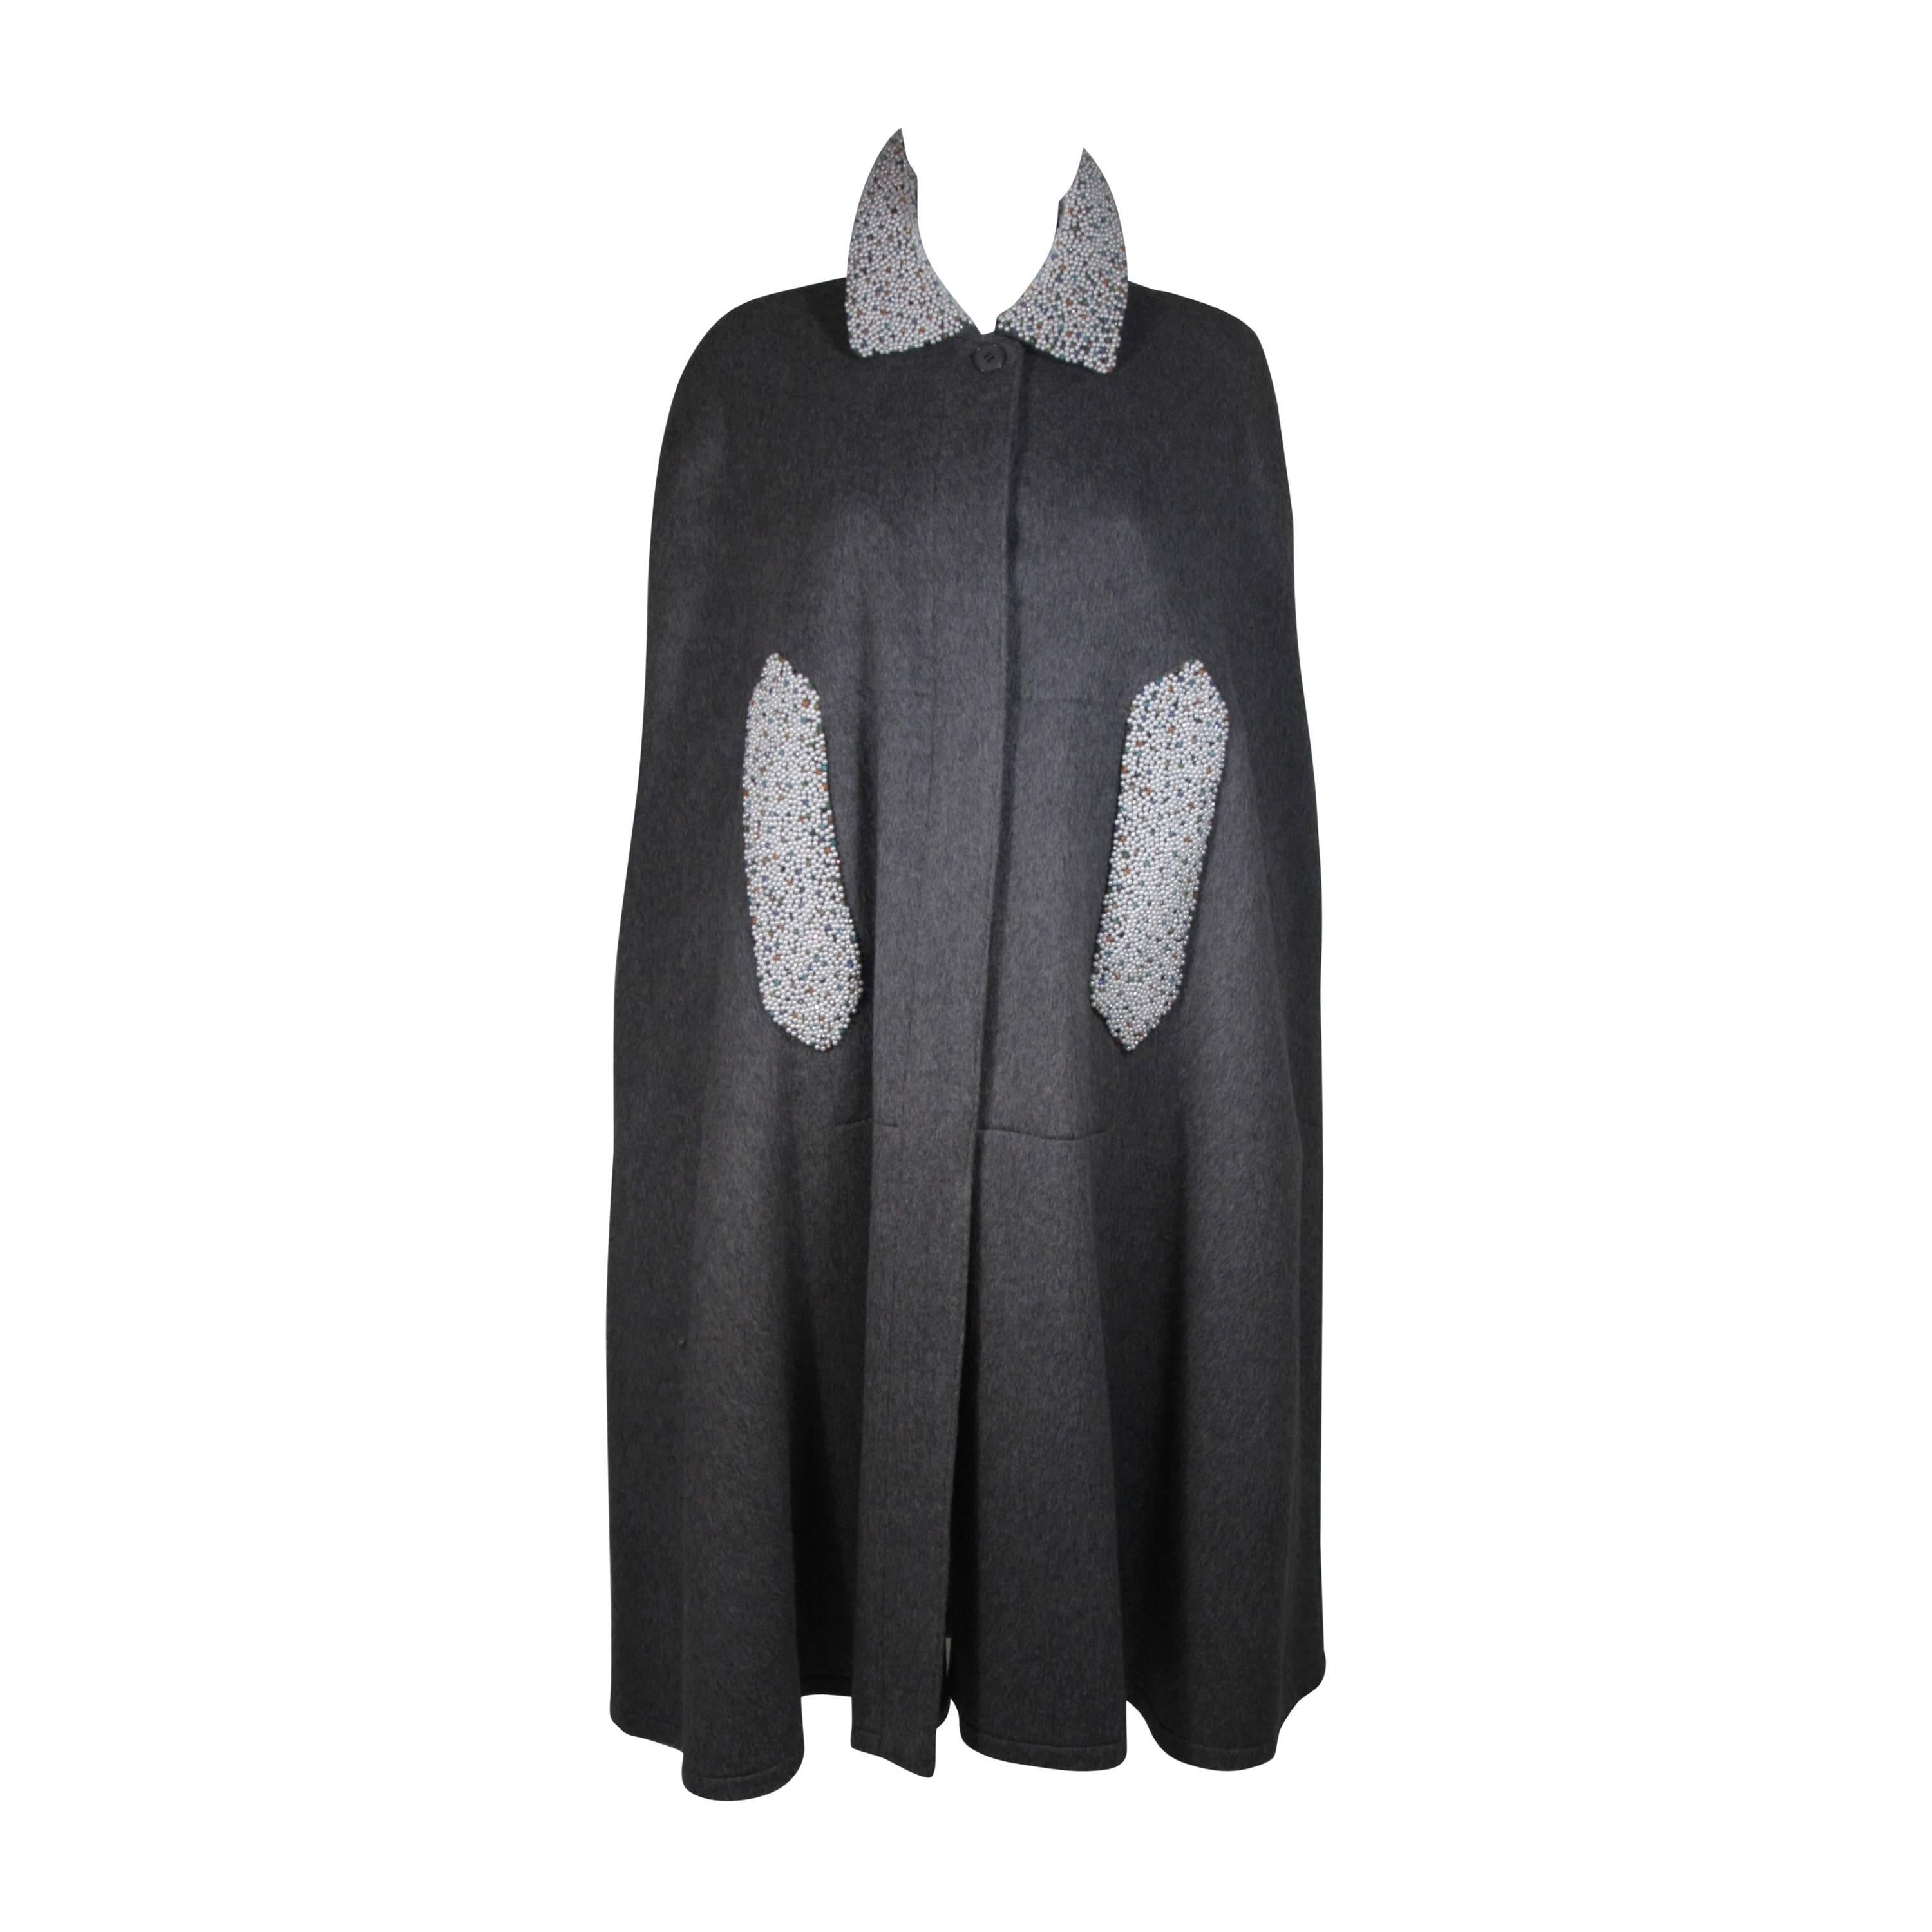 Vintage Grey Wool Cape with Pearl and Rhinestone Accents 